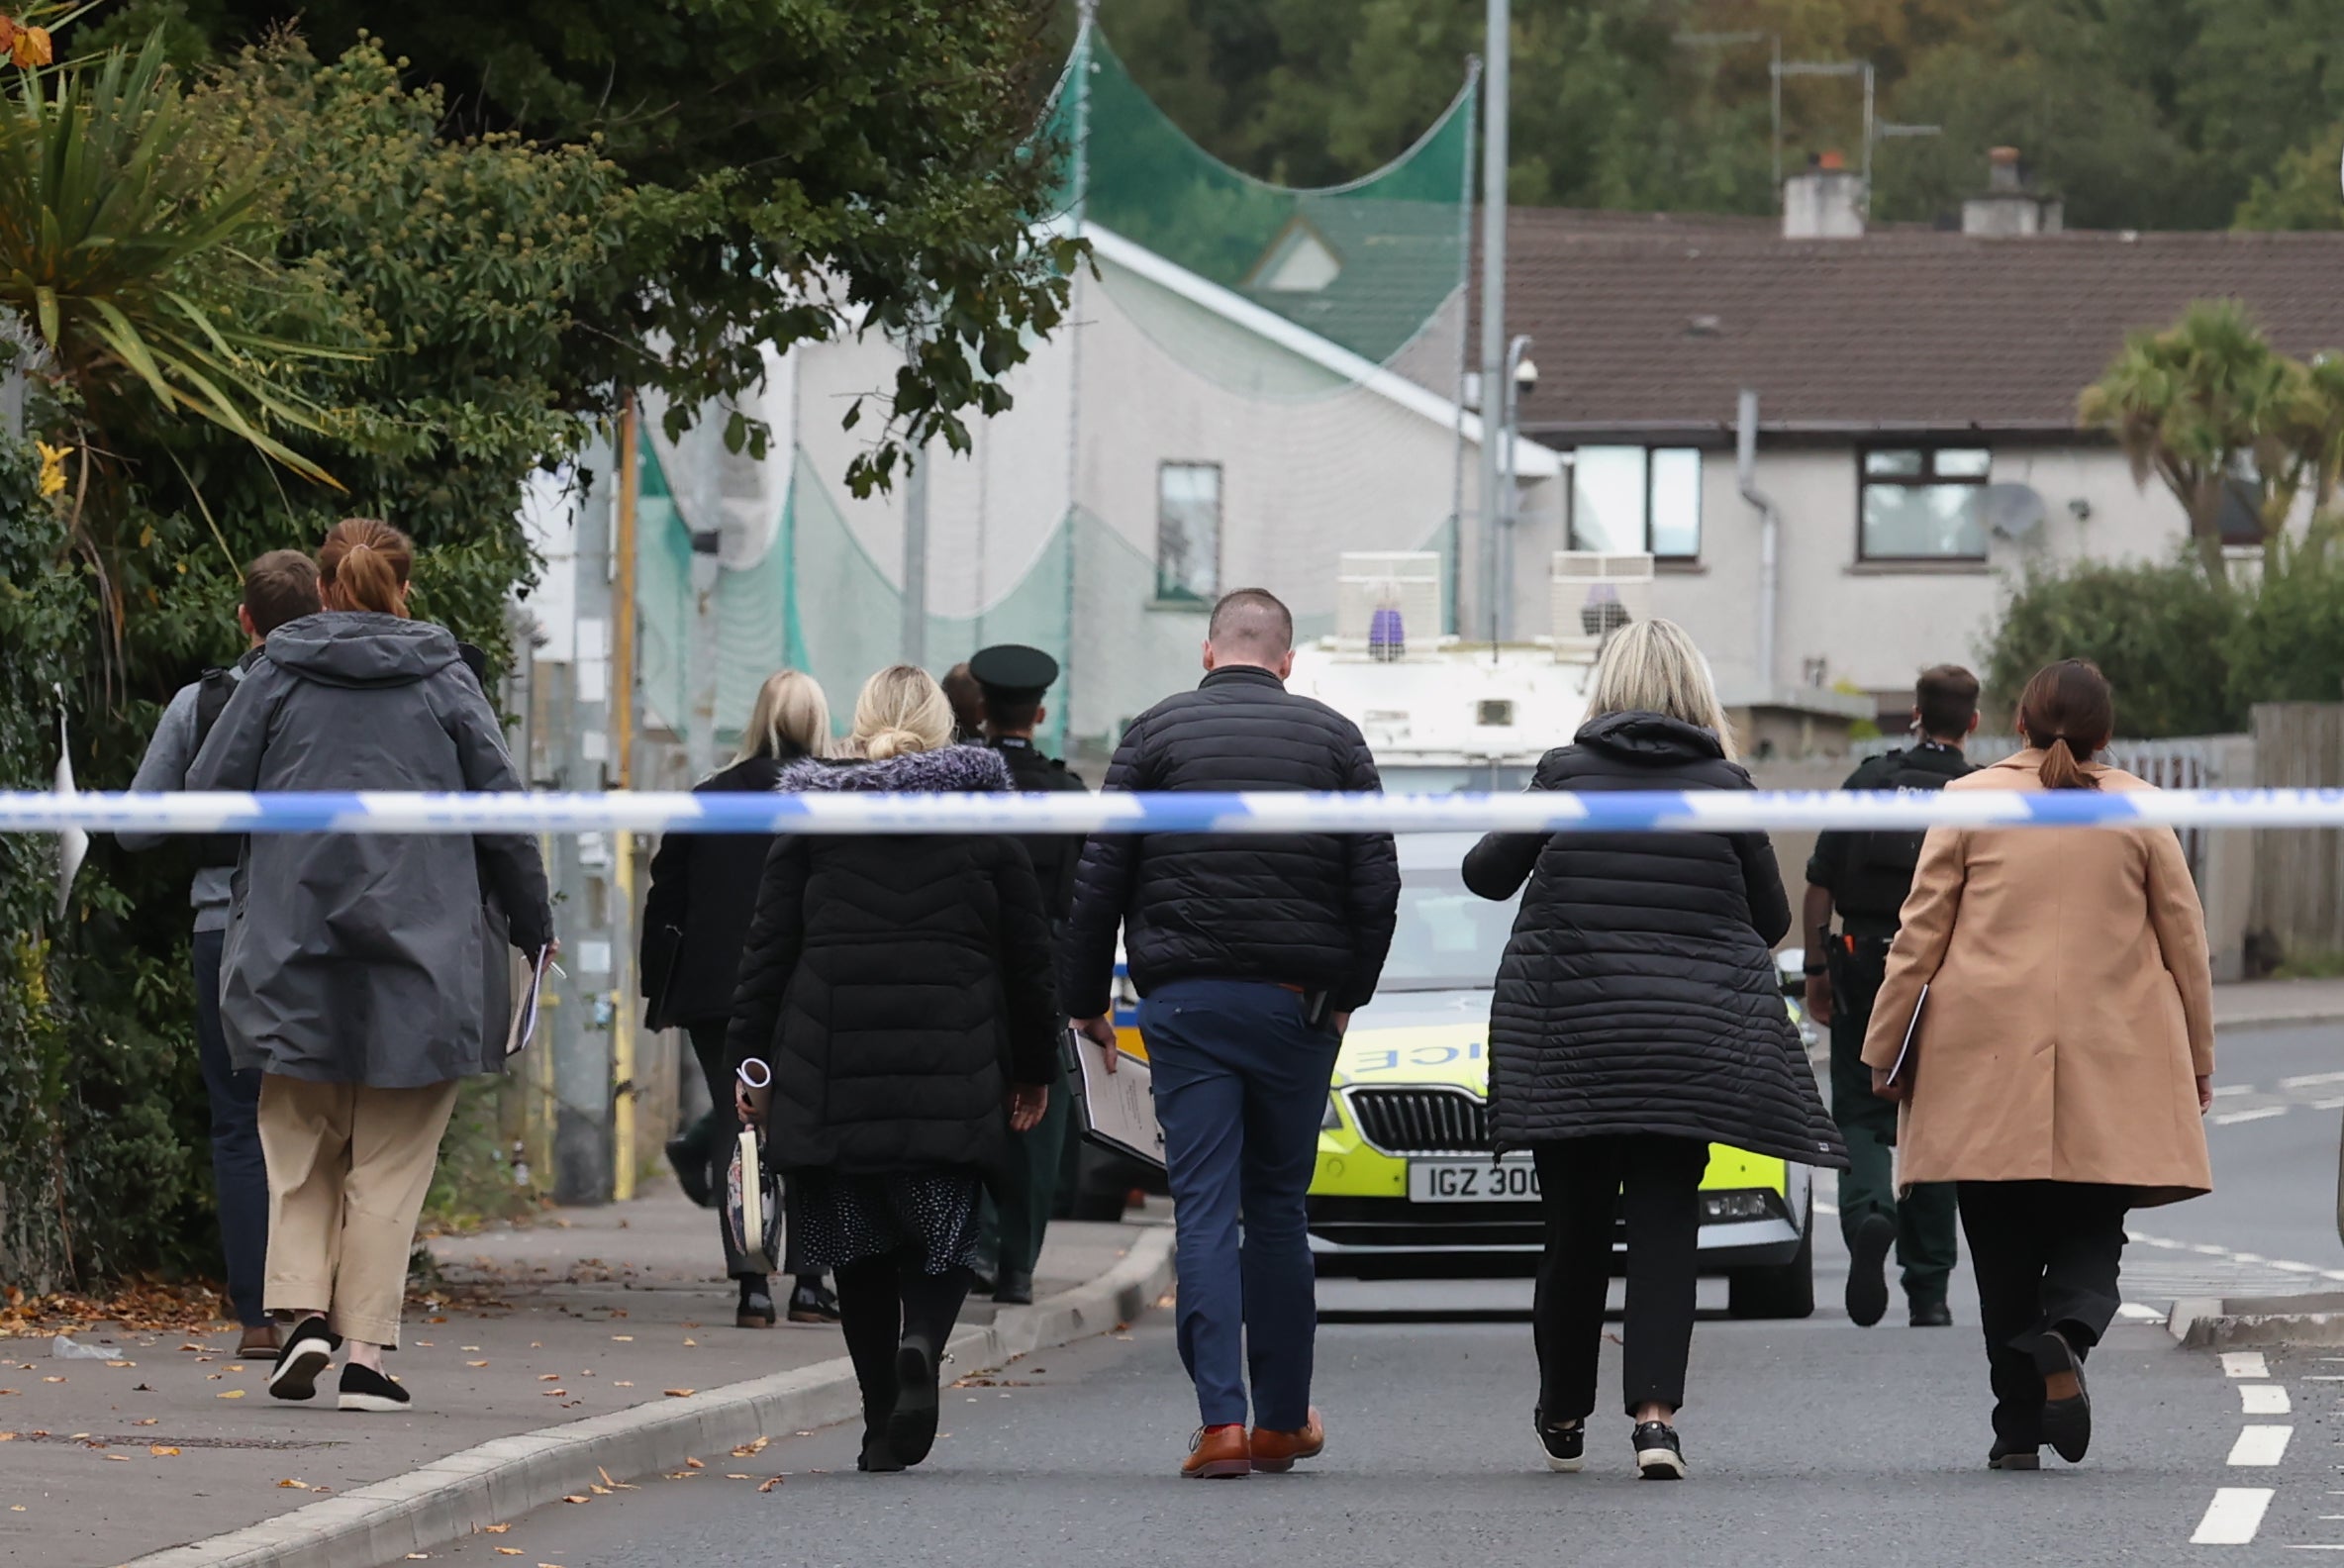 PSNI detectives arrive at the scene following a shooting at the clubhouse of Donegal Celtic Football Club